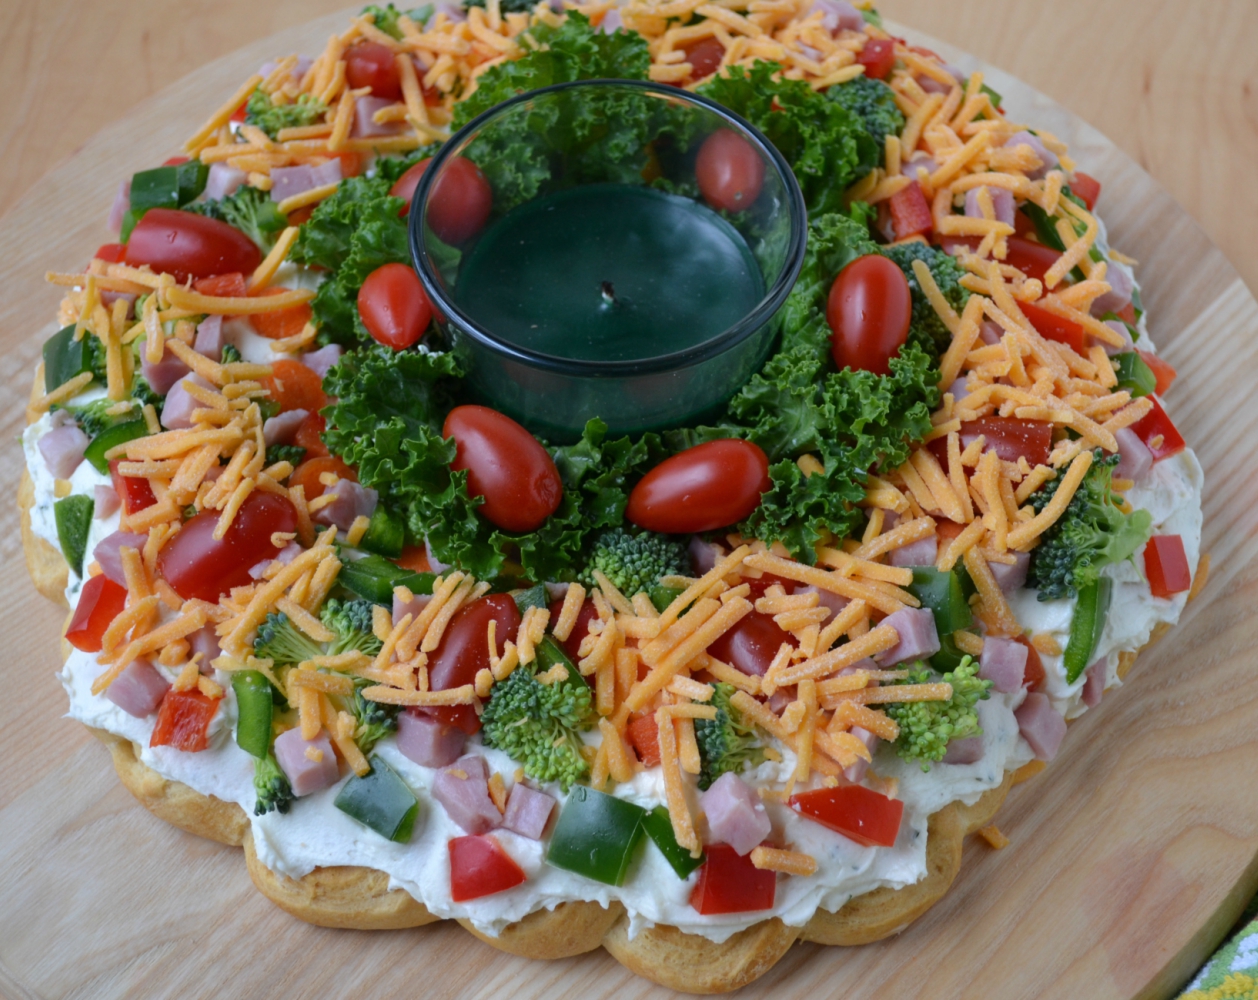 This Christmas Crescent Appetizer Wreath is a festive spin on a veggie pizza.